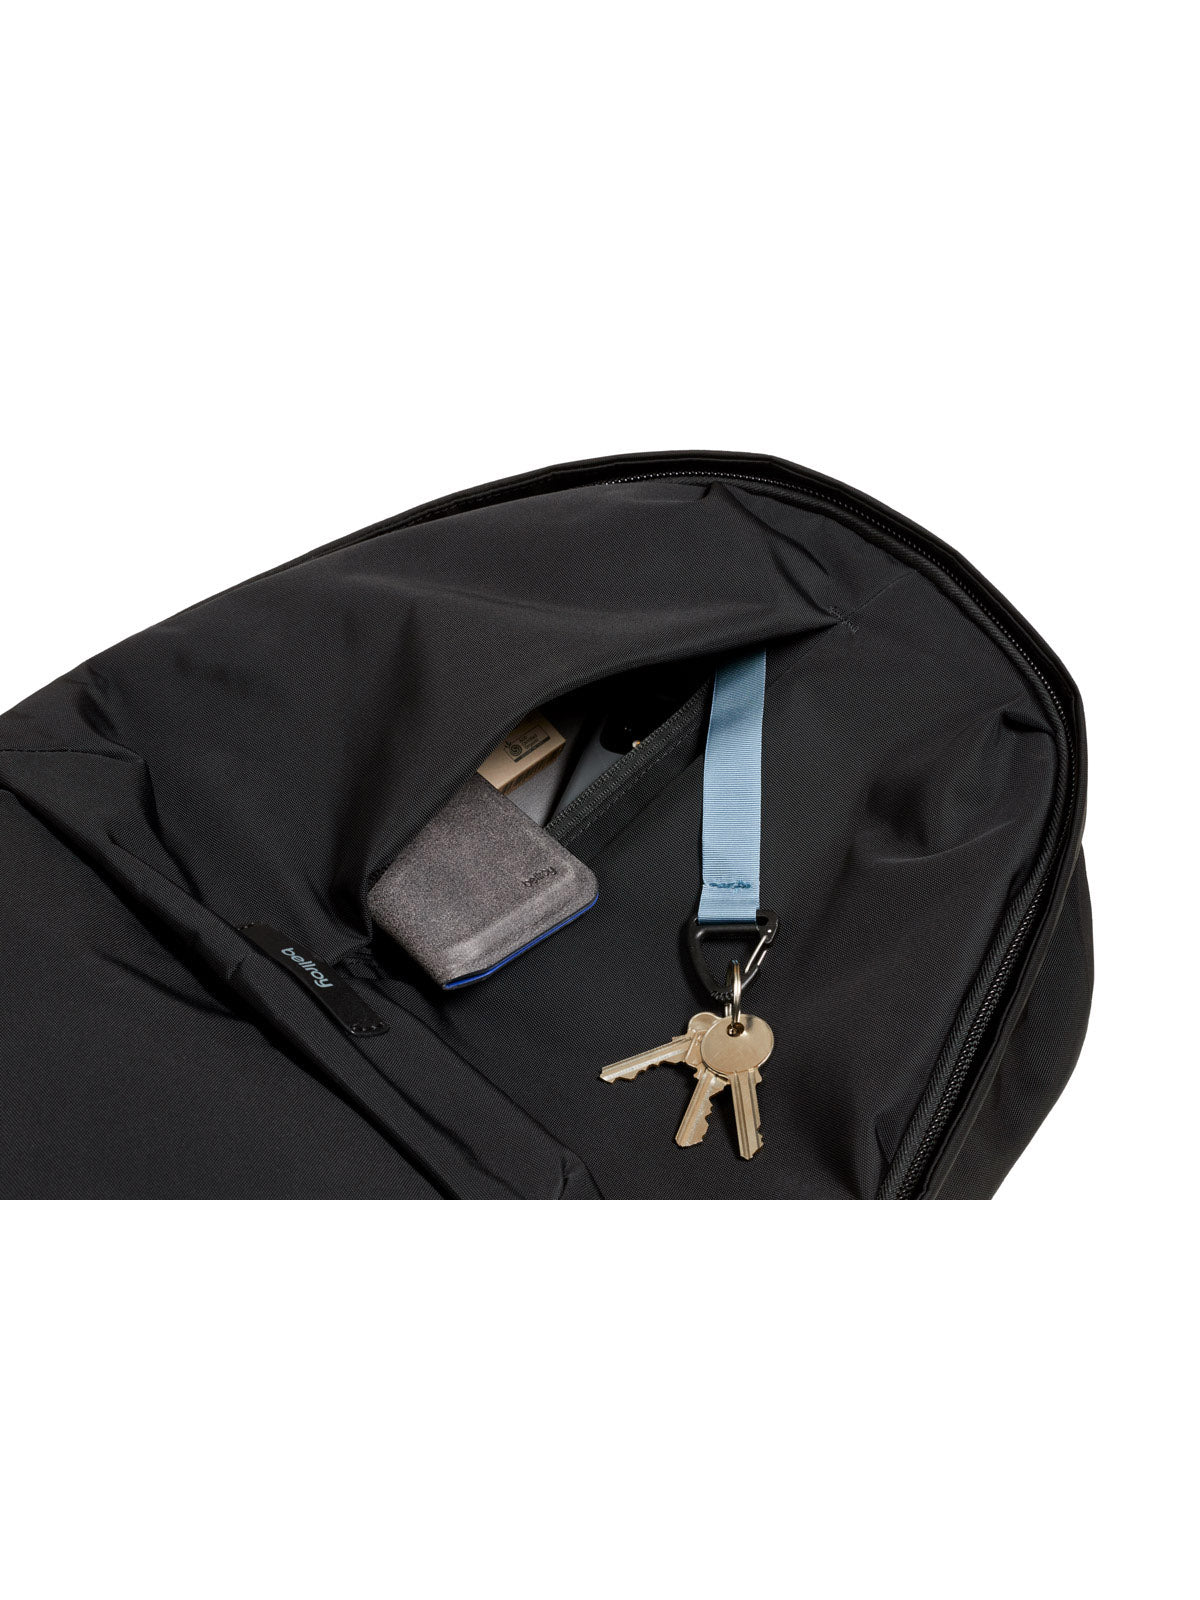 Bellroy Classic Backpack Plus Second Edition Black